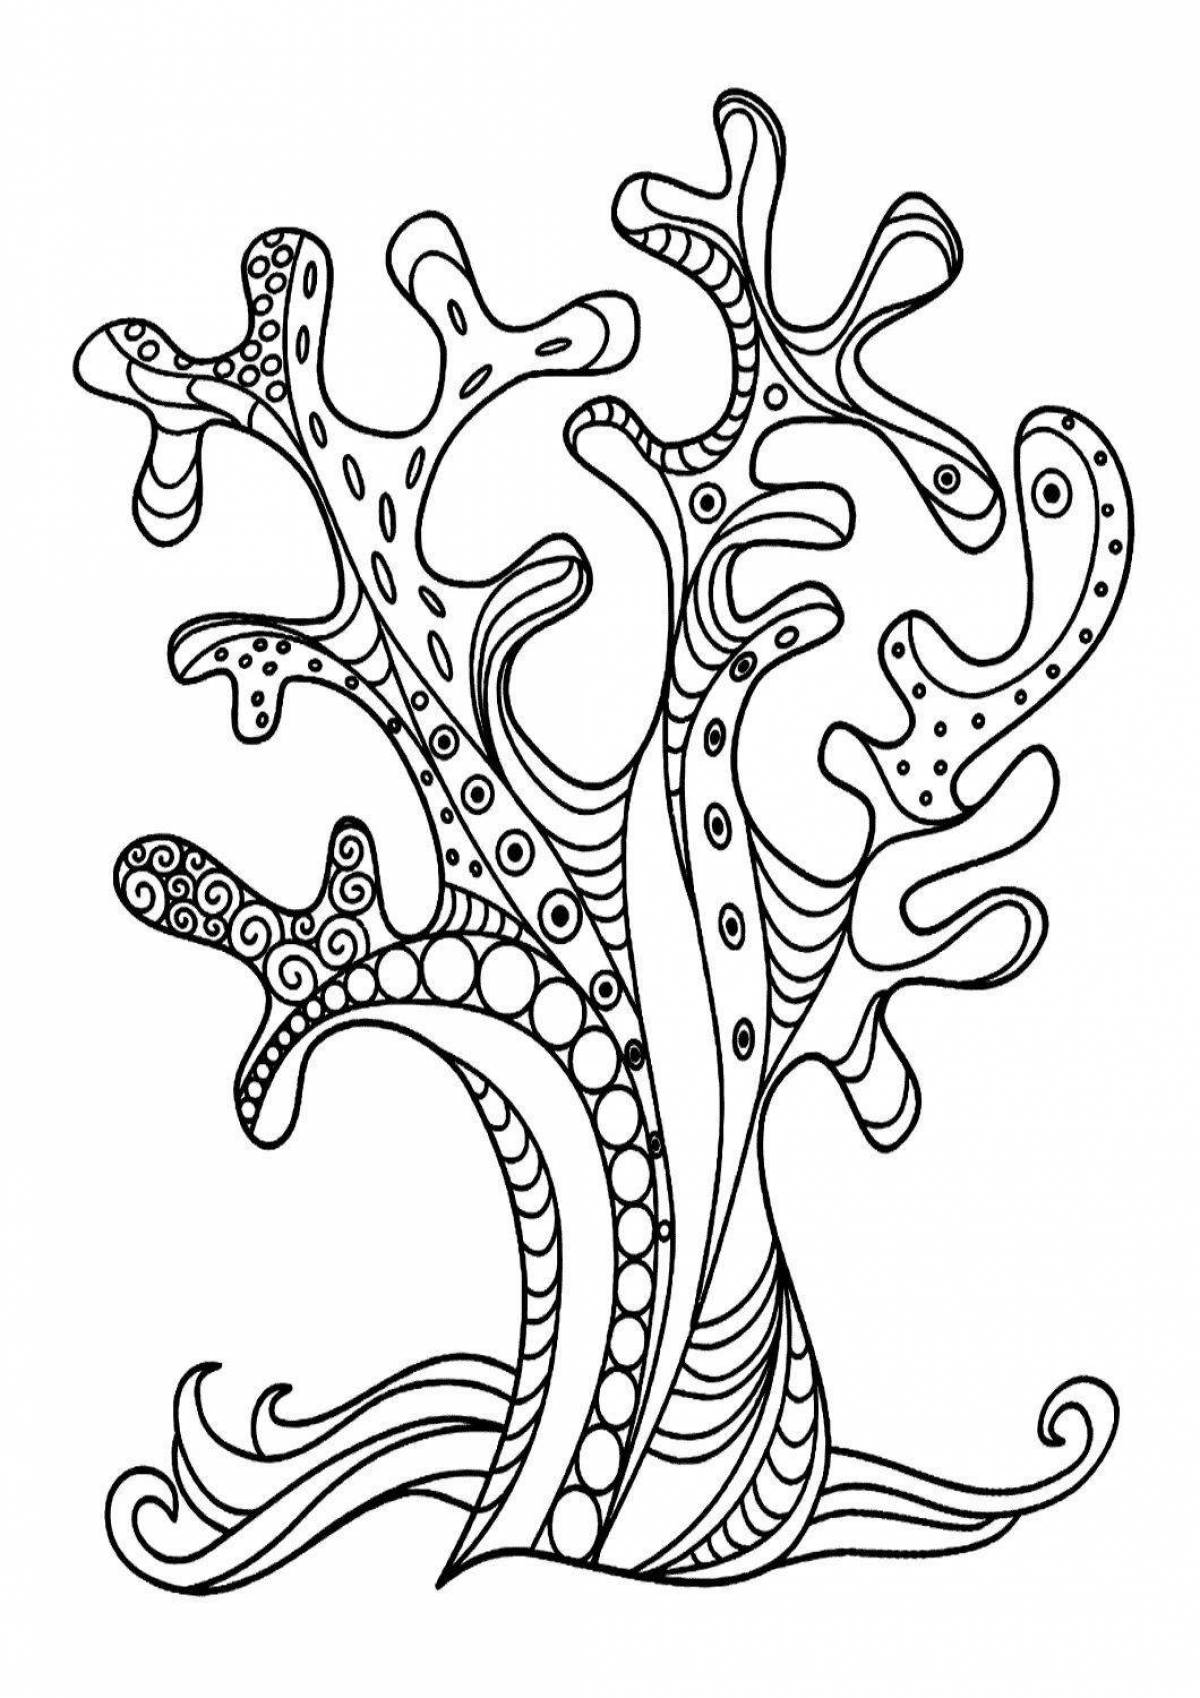 Coloring coral for children